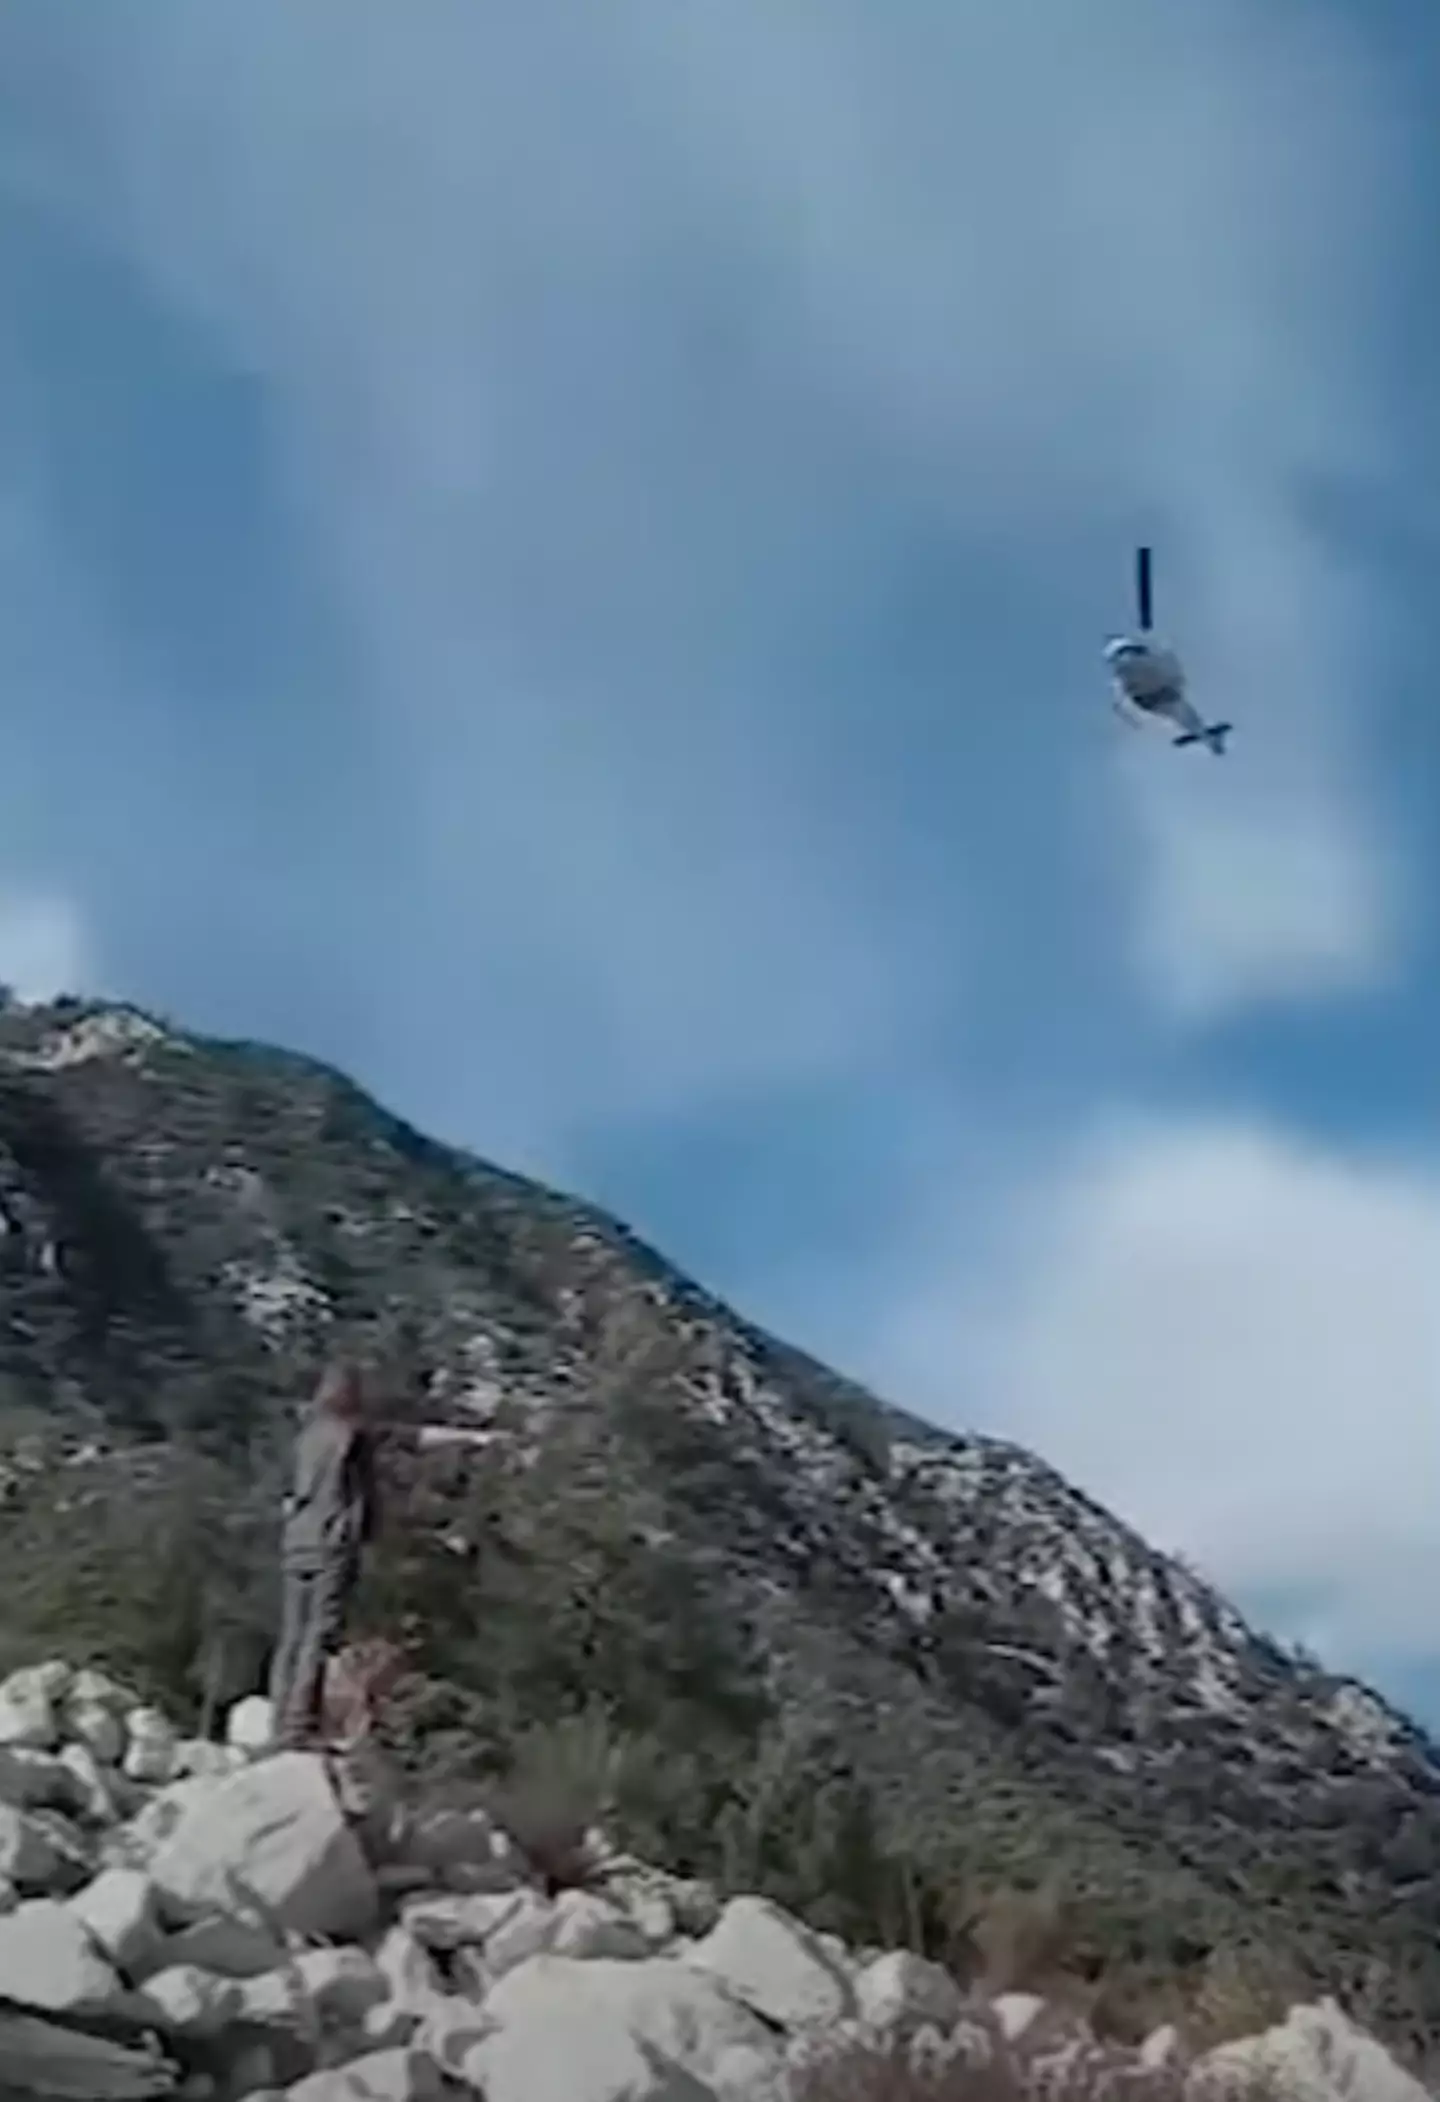 After the couple called 911, a helicopter came to rescue the stranded hiker.